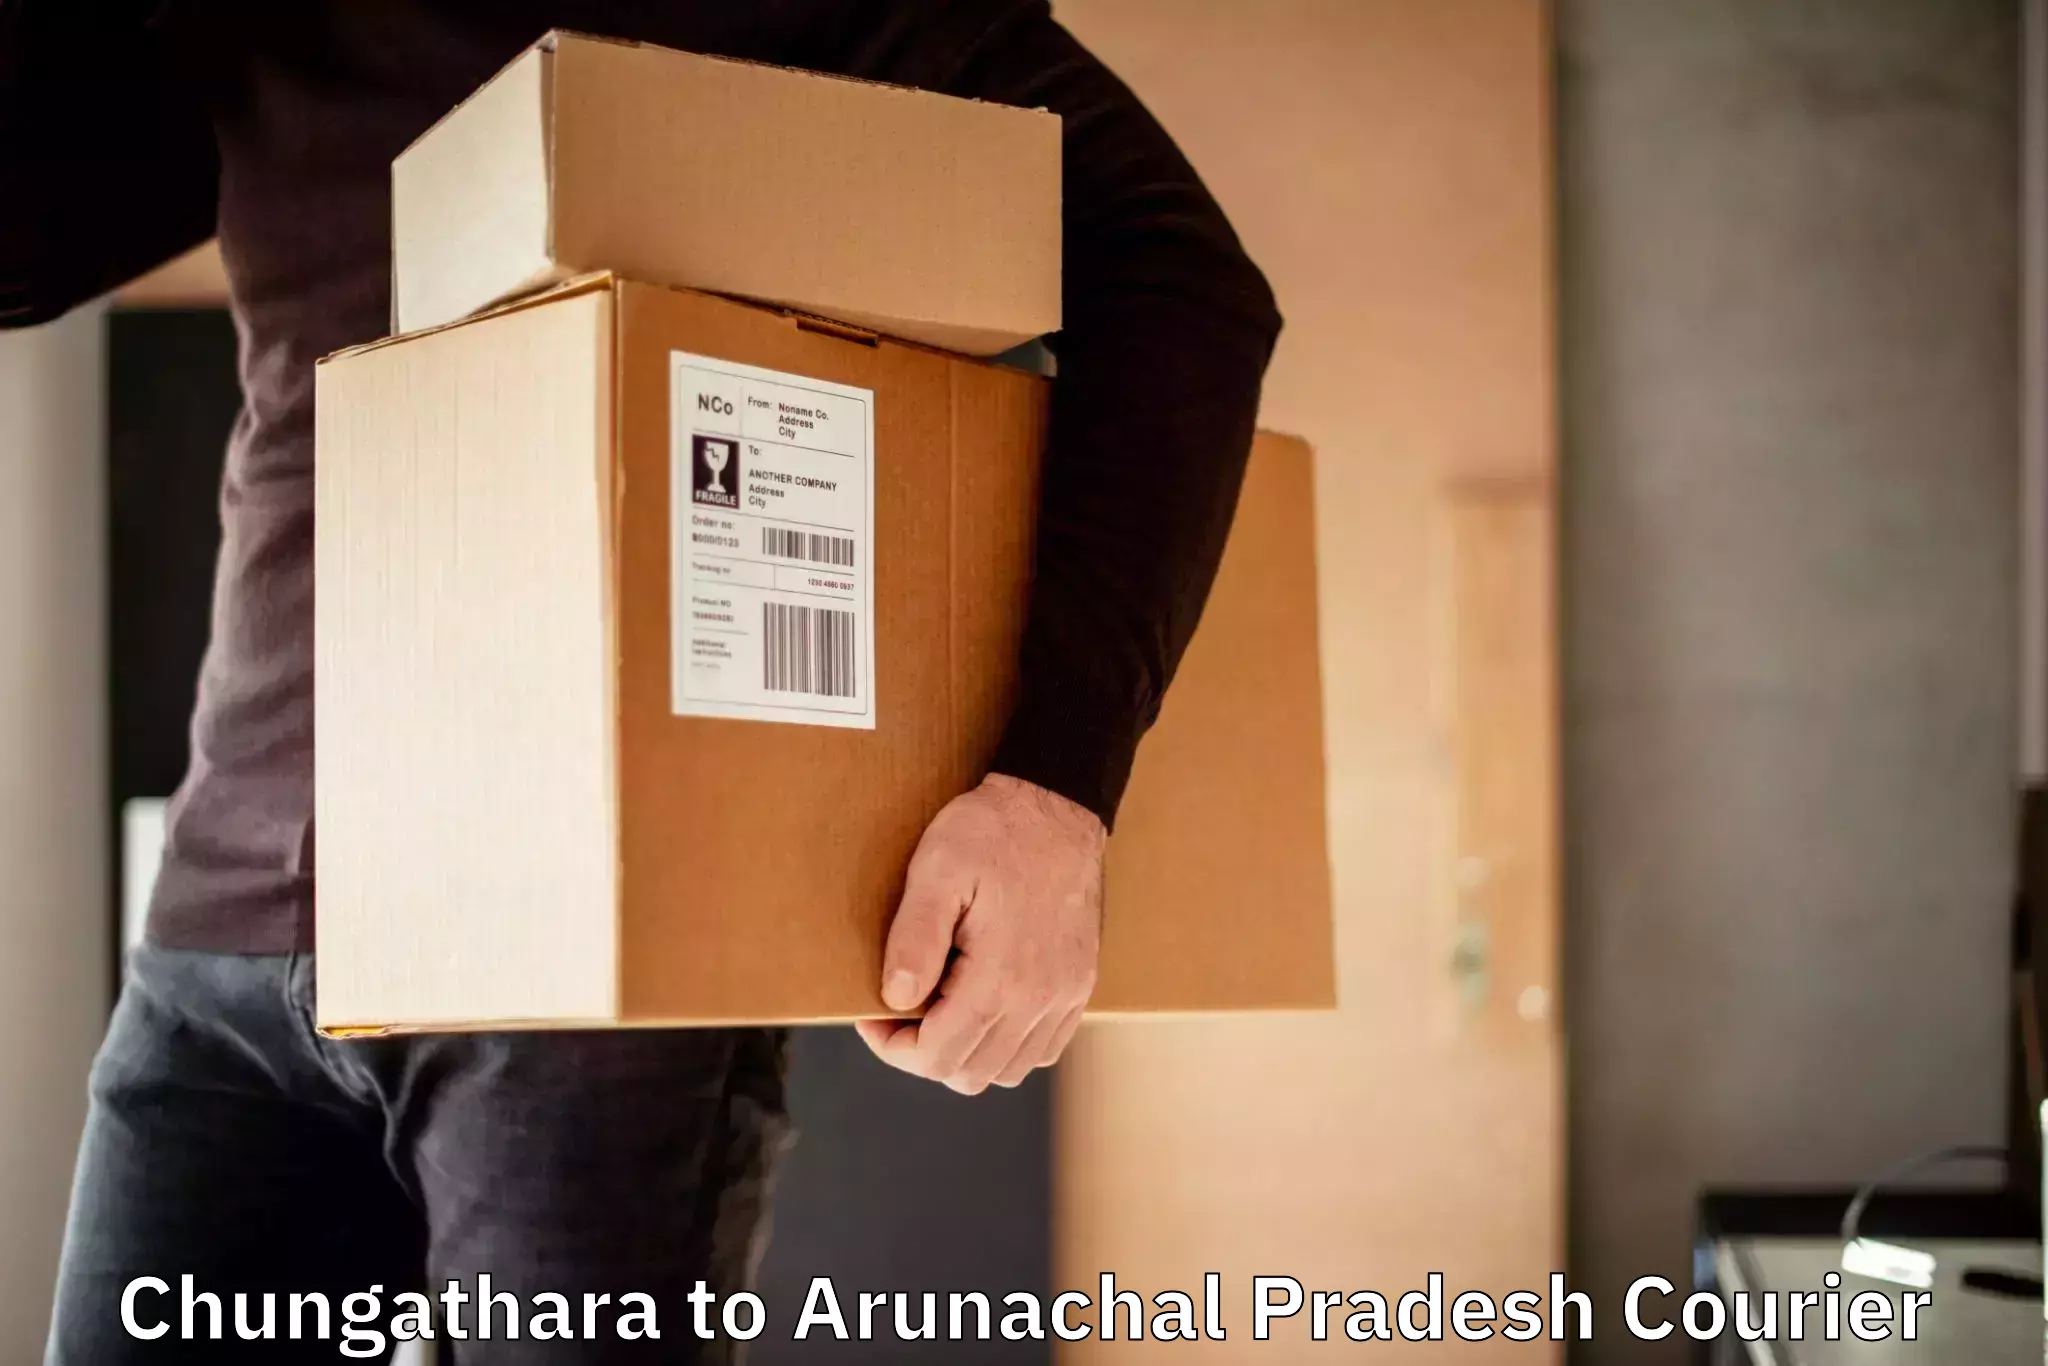 Reliable courier services in Chungathara to Aalo